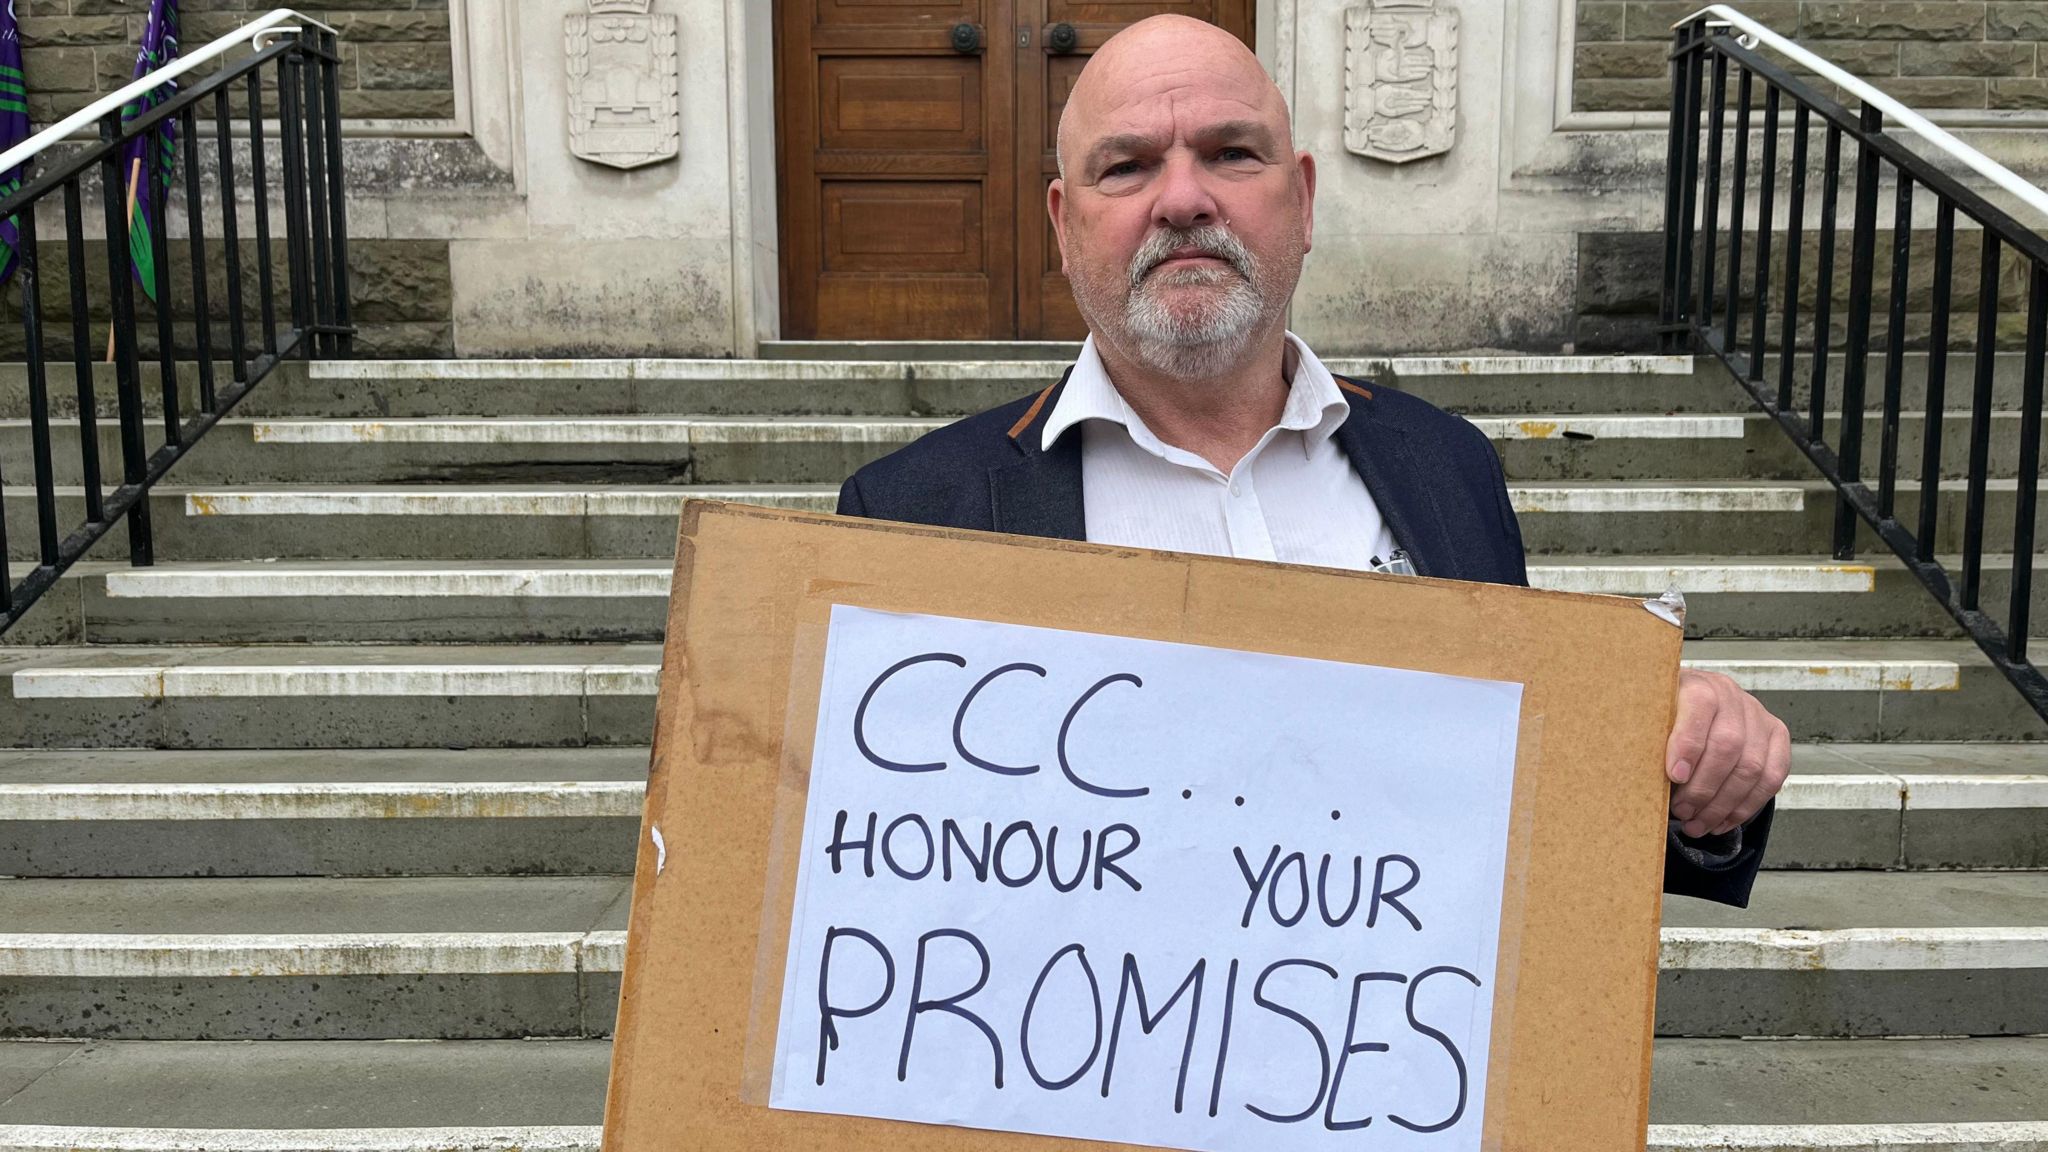 A man stands on the steps of Carmarthenshire County Hall holding a sign that reads 'CCC honour your promises'